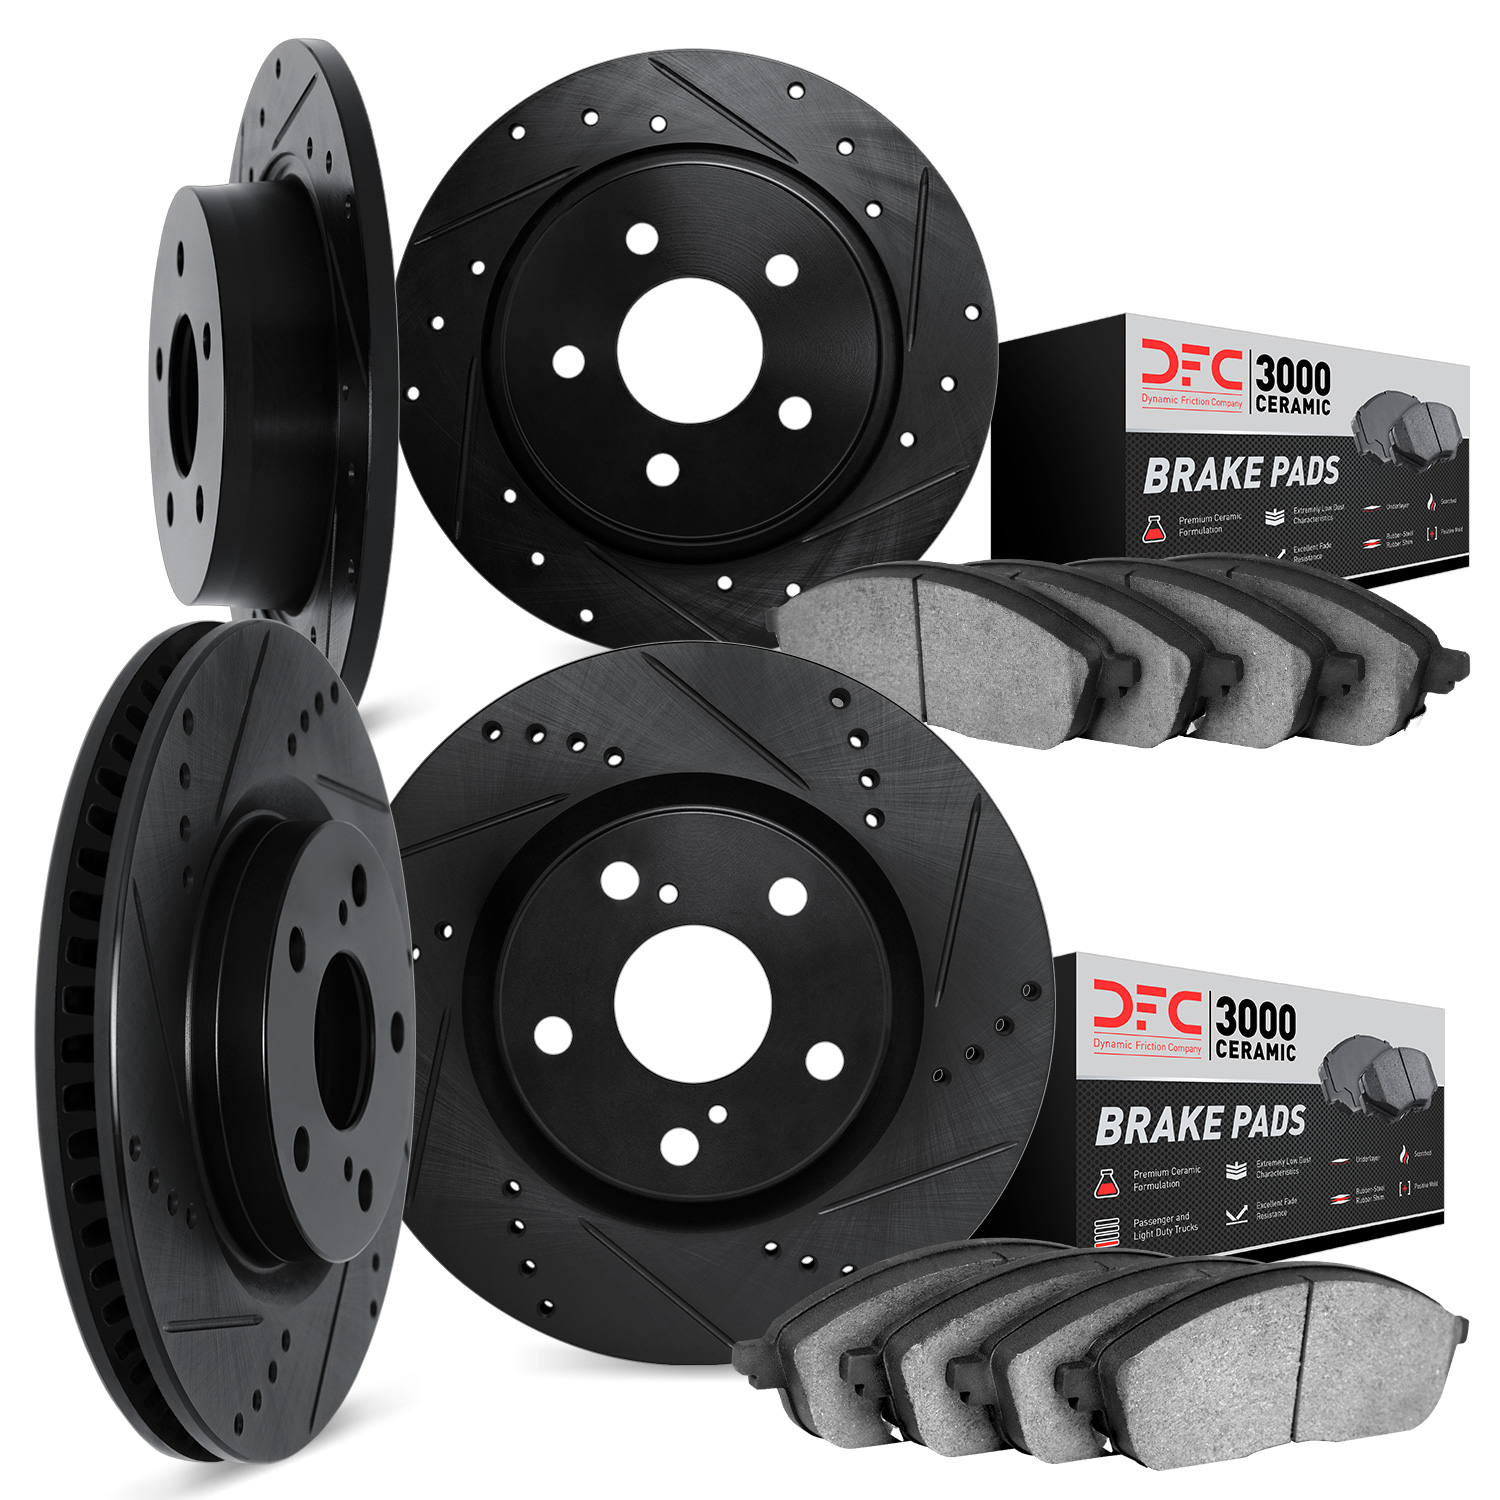 8304-65007 Drilled/Slotted Brake Rotors with 3000-Series Ceramic Brake Pads Kit [Black], 1999-2010 GM, Position: Front and Rear